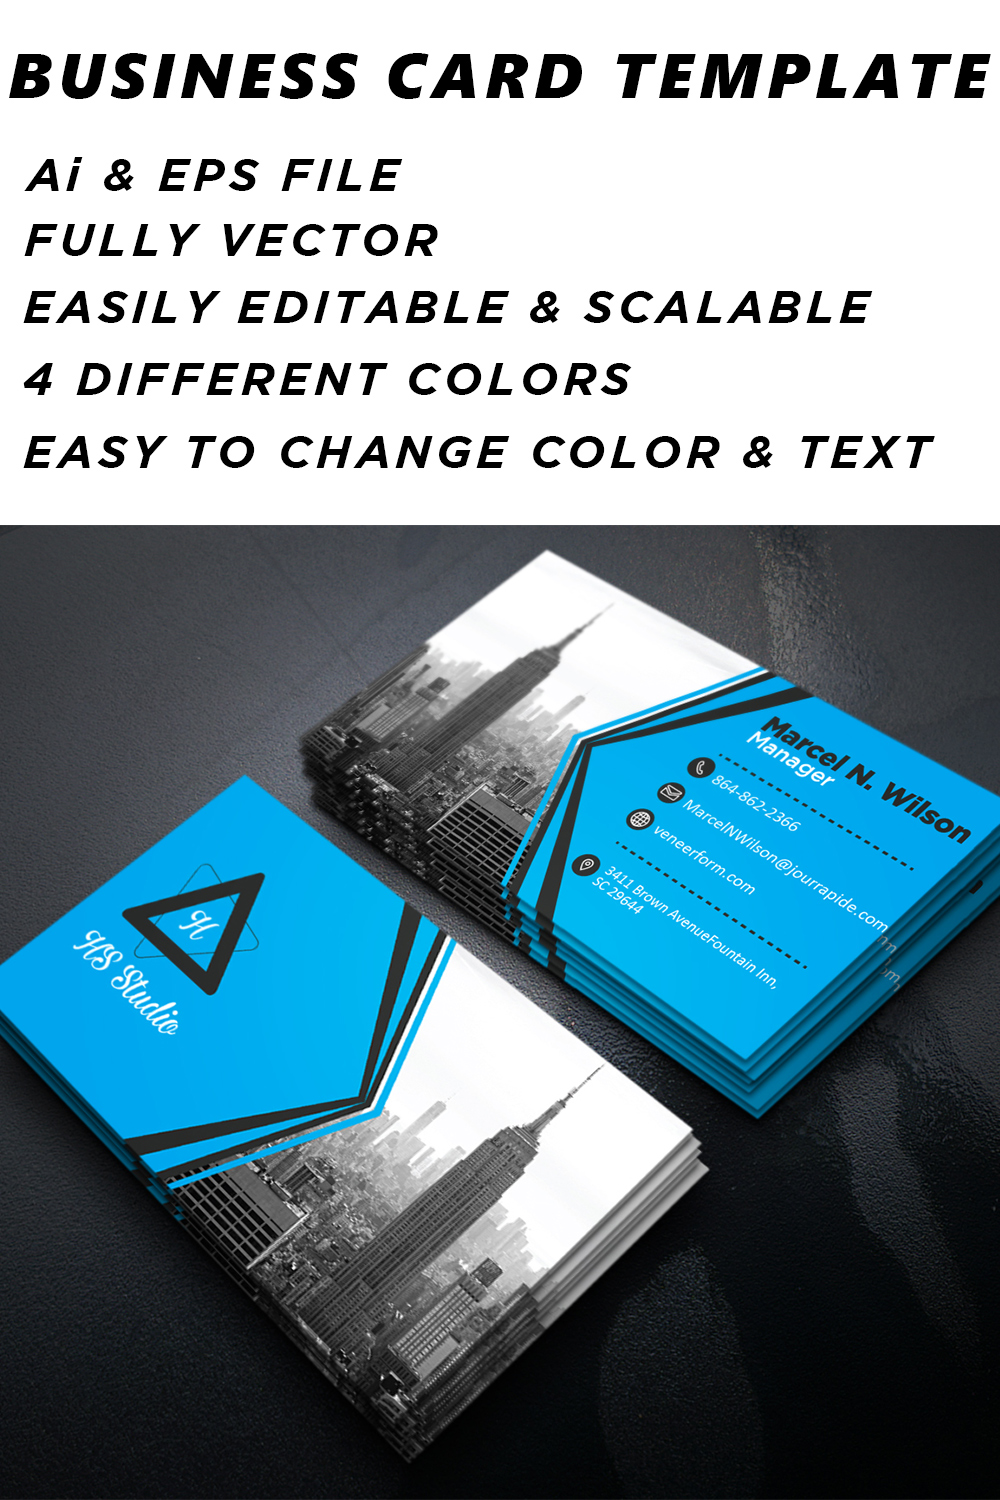 Corporative Business Card Templates In 4 Colors.